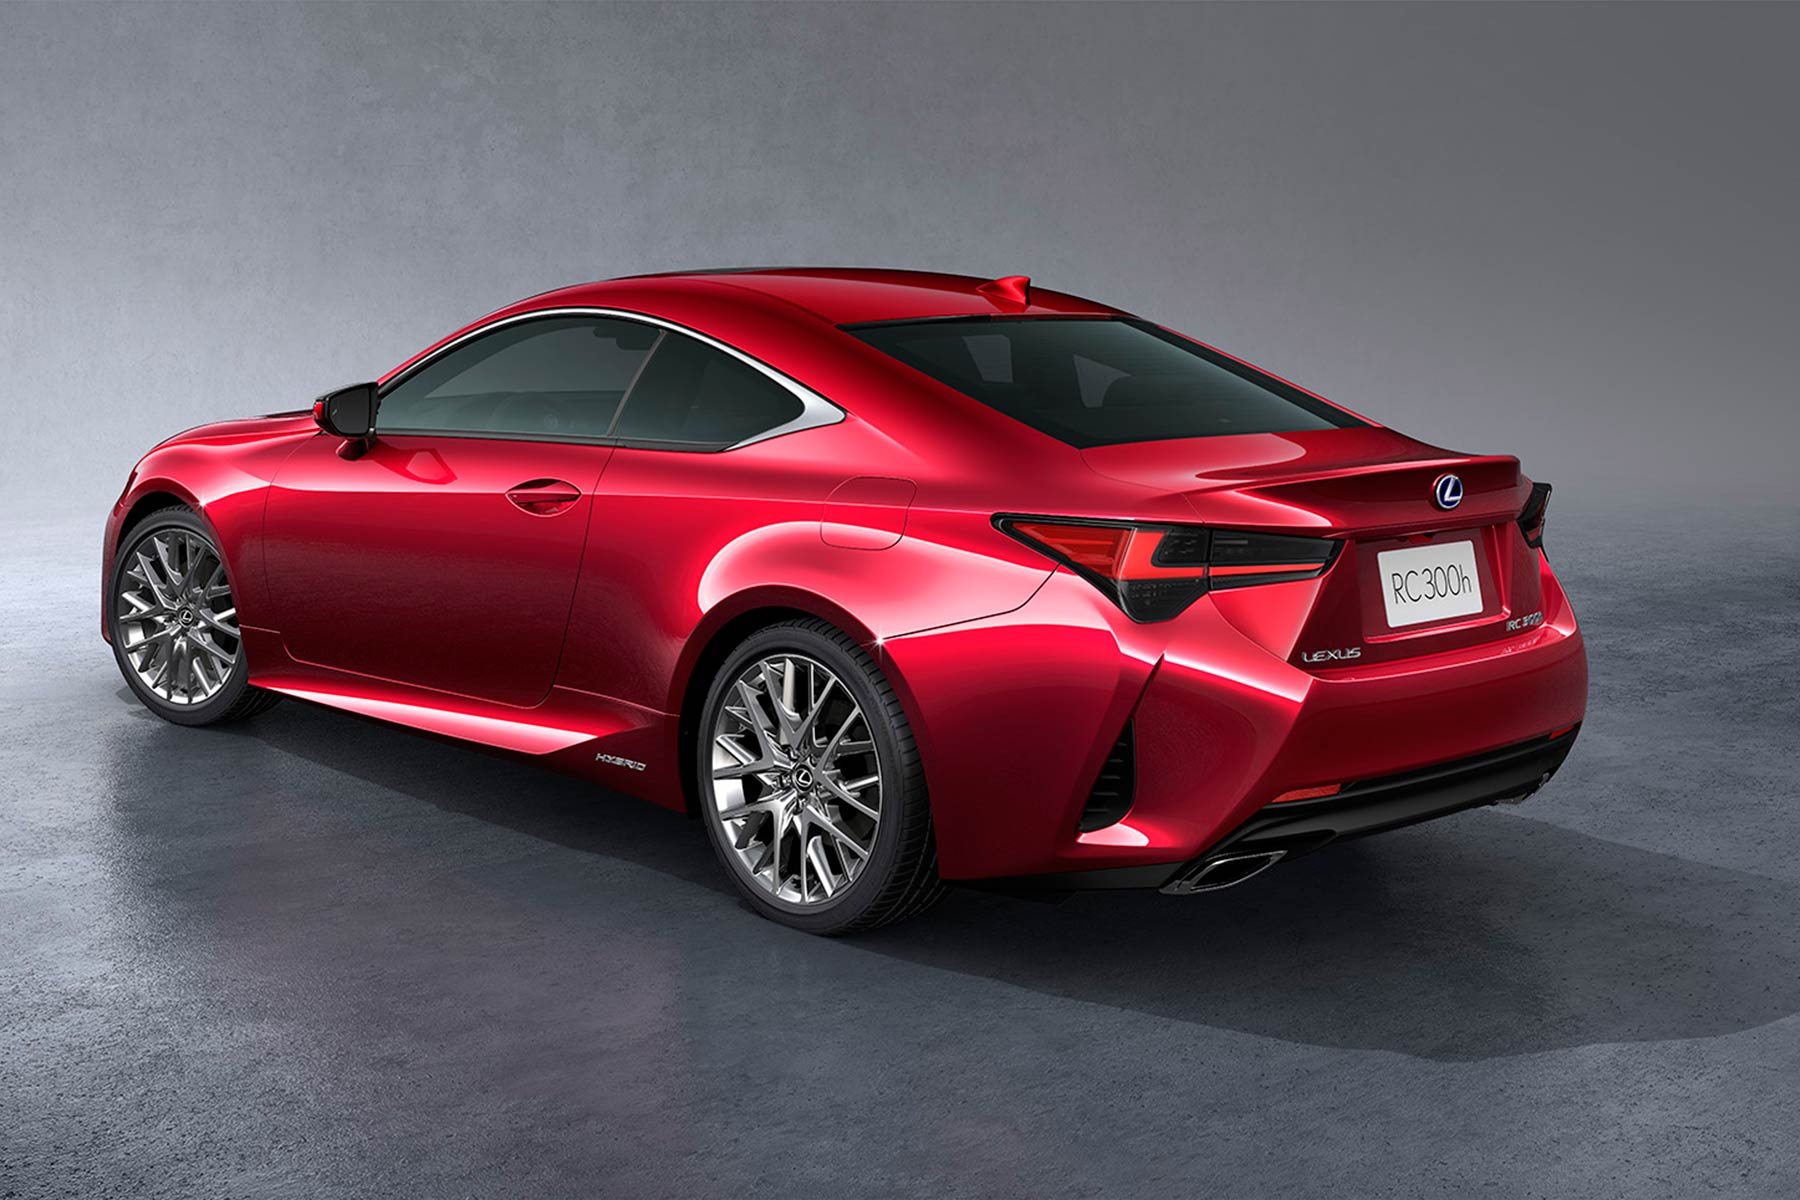 Lexus RC sports coupe updated for 2019 | Motoring Research